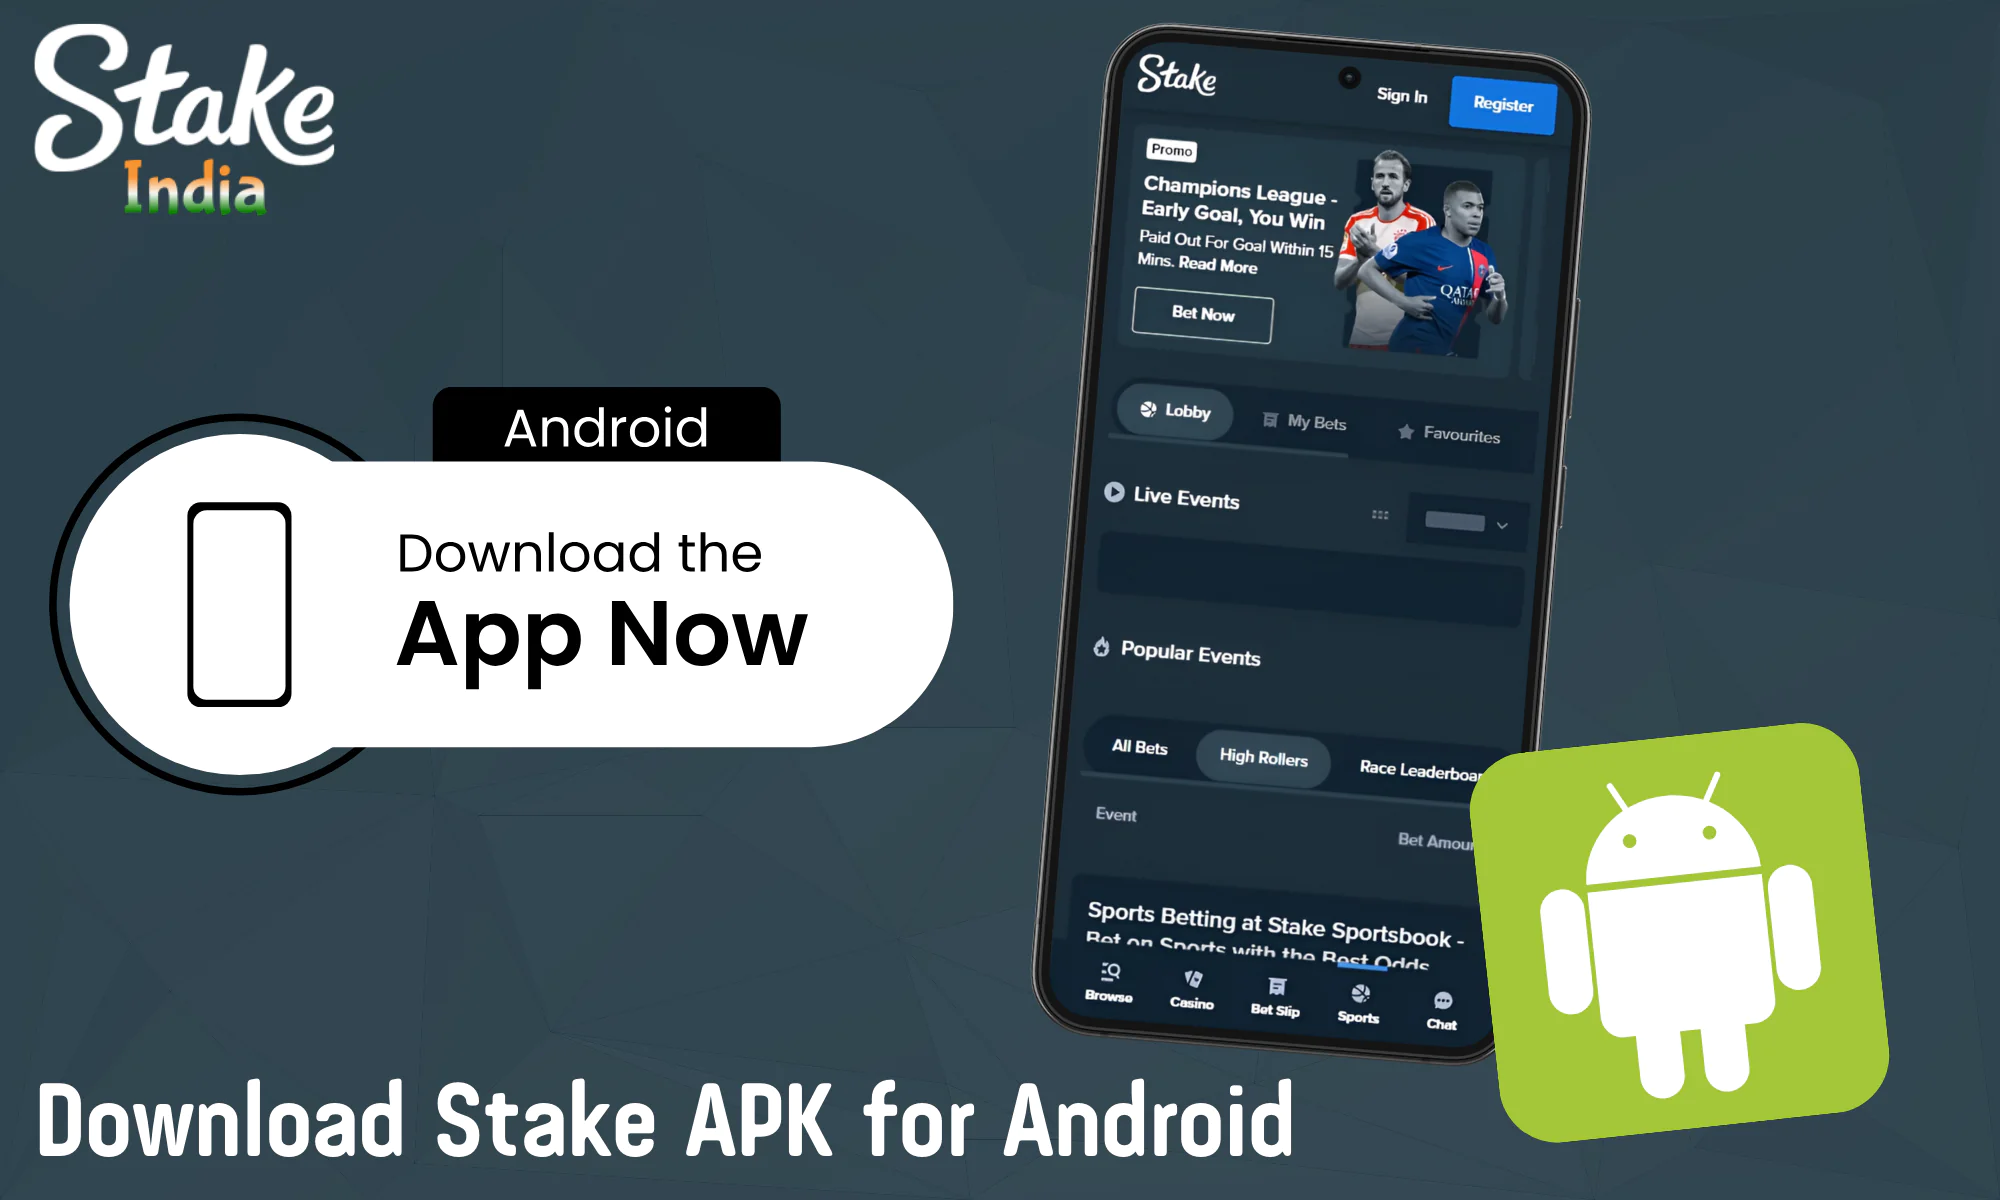 Step-by-step instructions on how to download the Stake app for Android